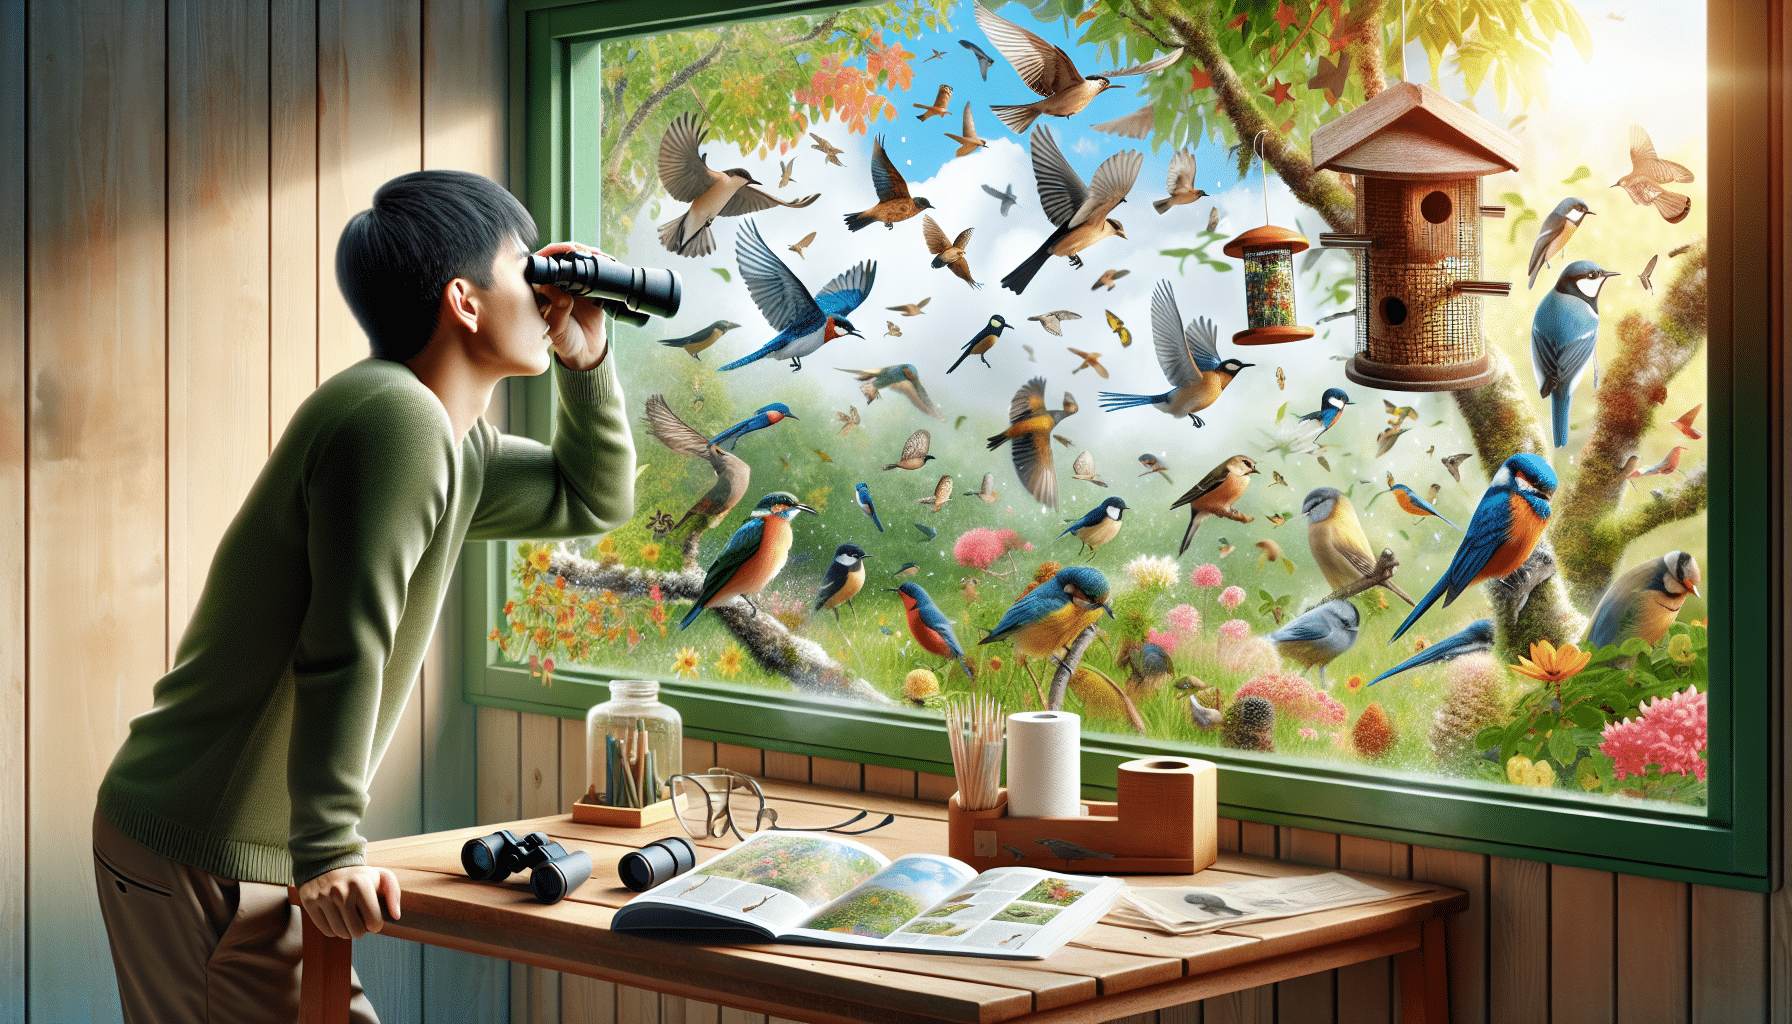 discover the magic of nature and how beginners are changing their lives through backyard birdwatching. find out how this hobby can have a profound impact on your well-being and connection to the natural world.